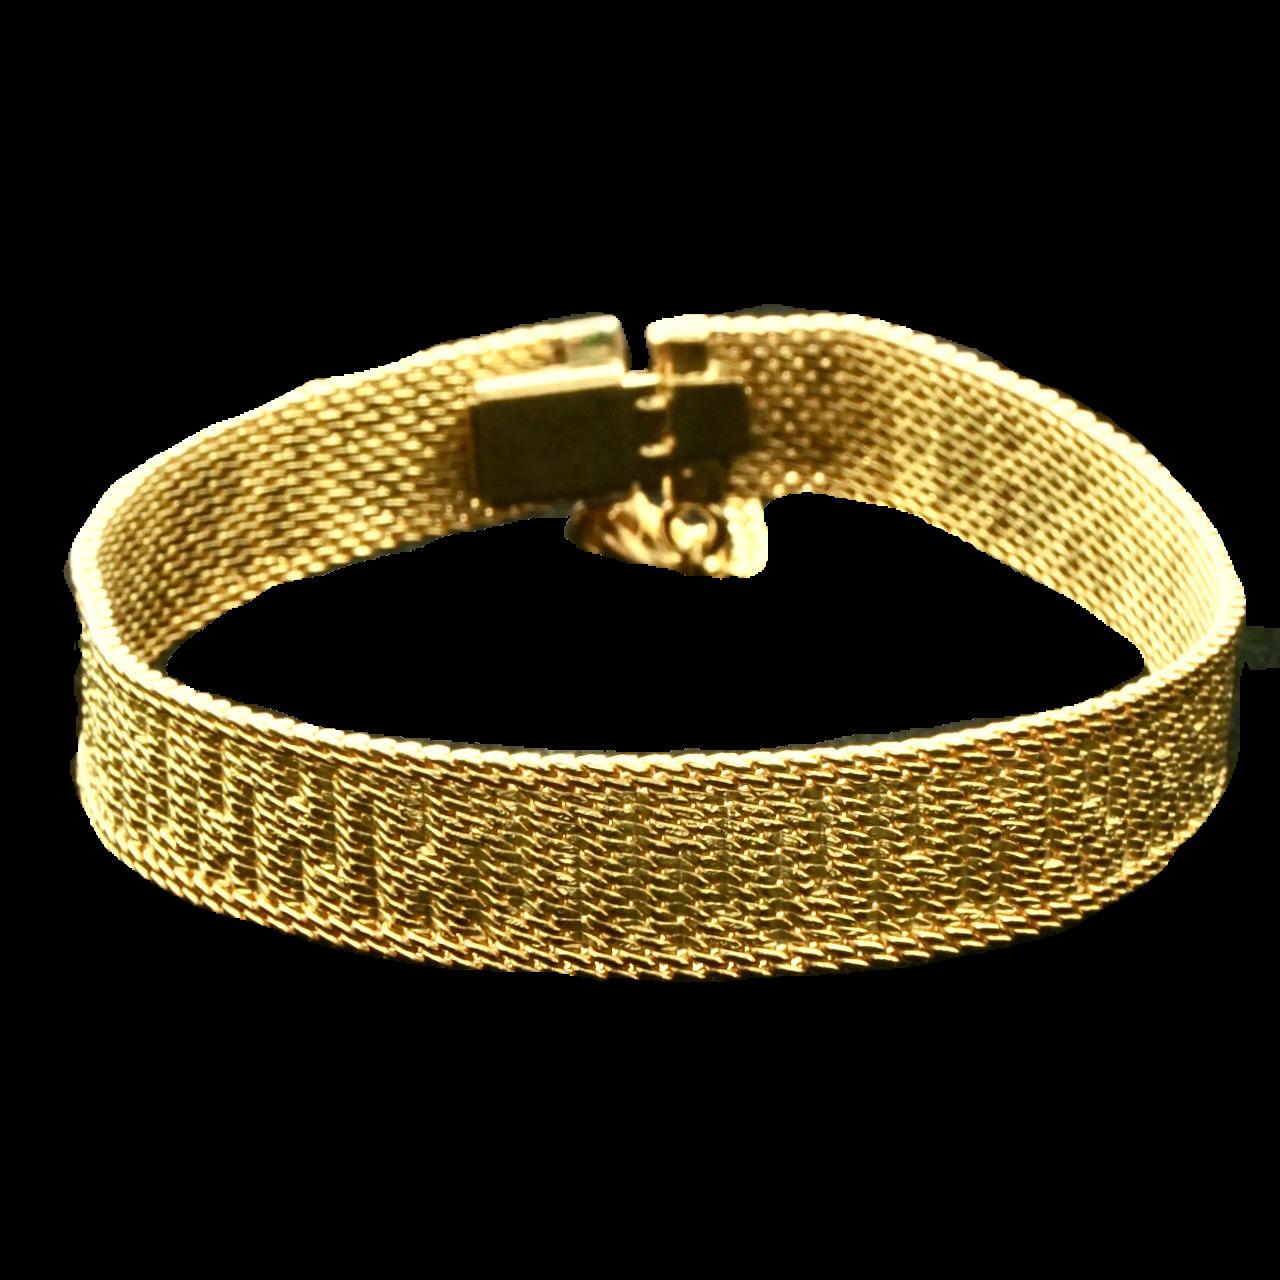 Gold Plated Ridged Mesh Link Bracelet circa 1980s For Sale 1